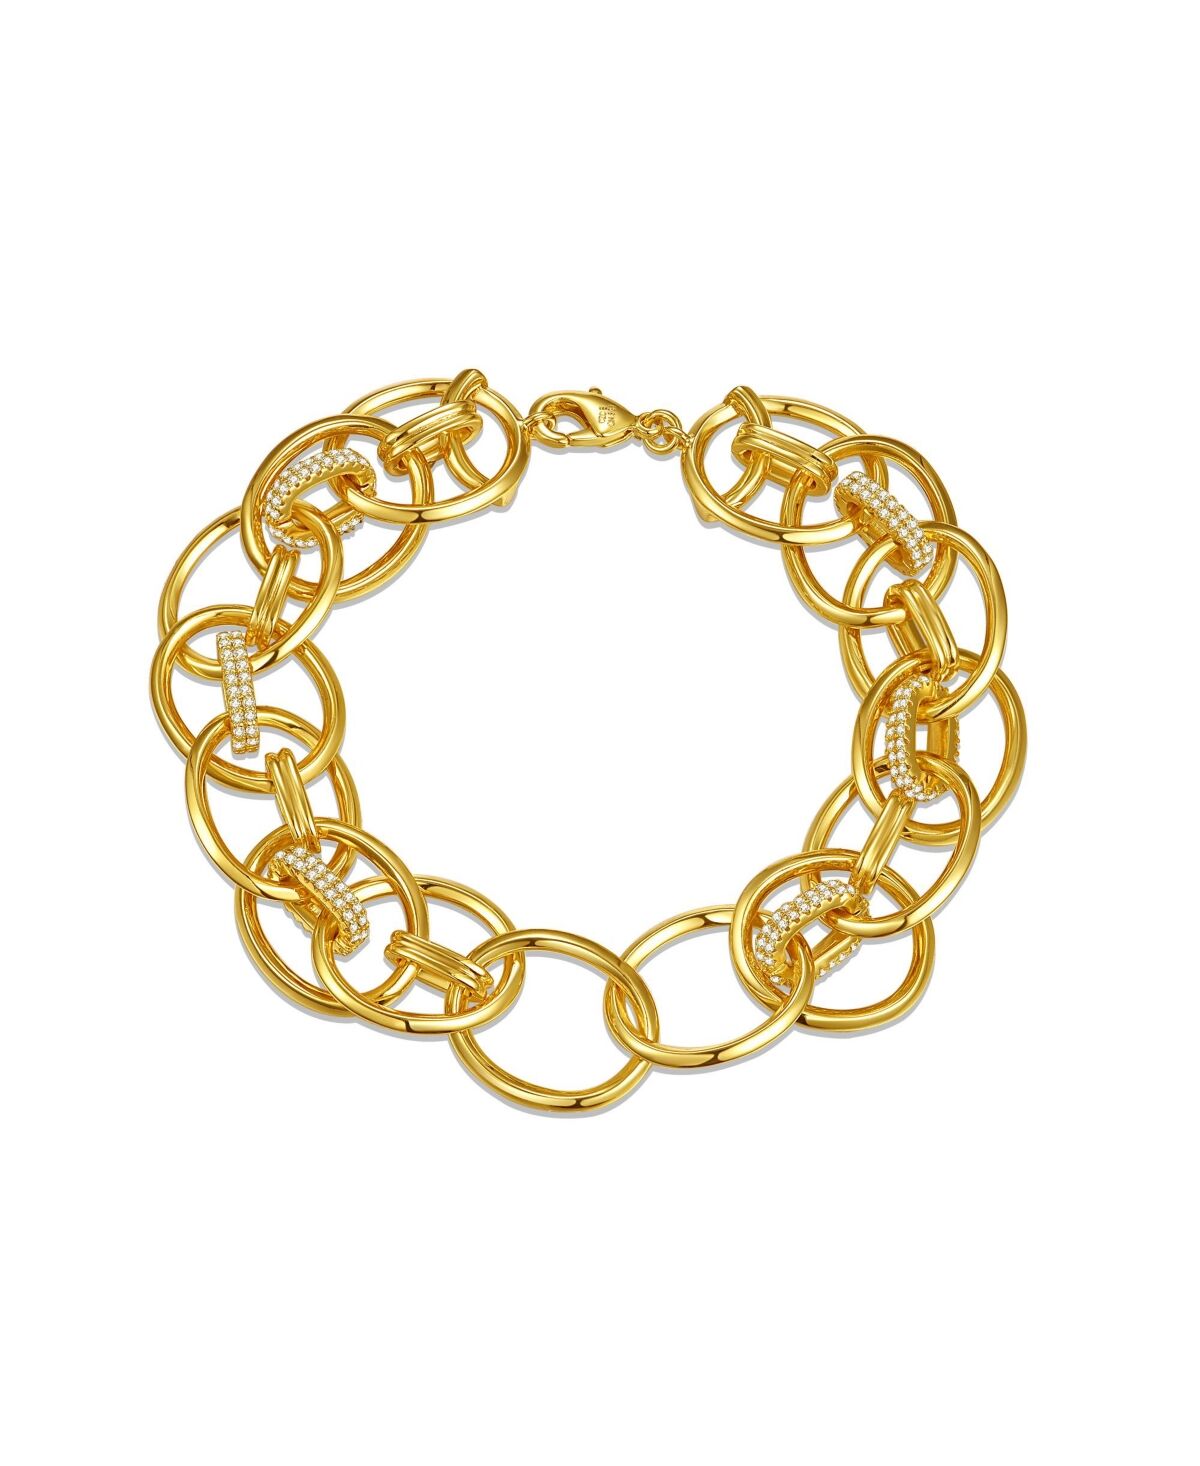 Rachel Glauber Teen's Yellow Gold Plated with Cubic Zirconia Double Entwined Cable Chain Bracelet - Gold